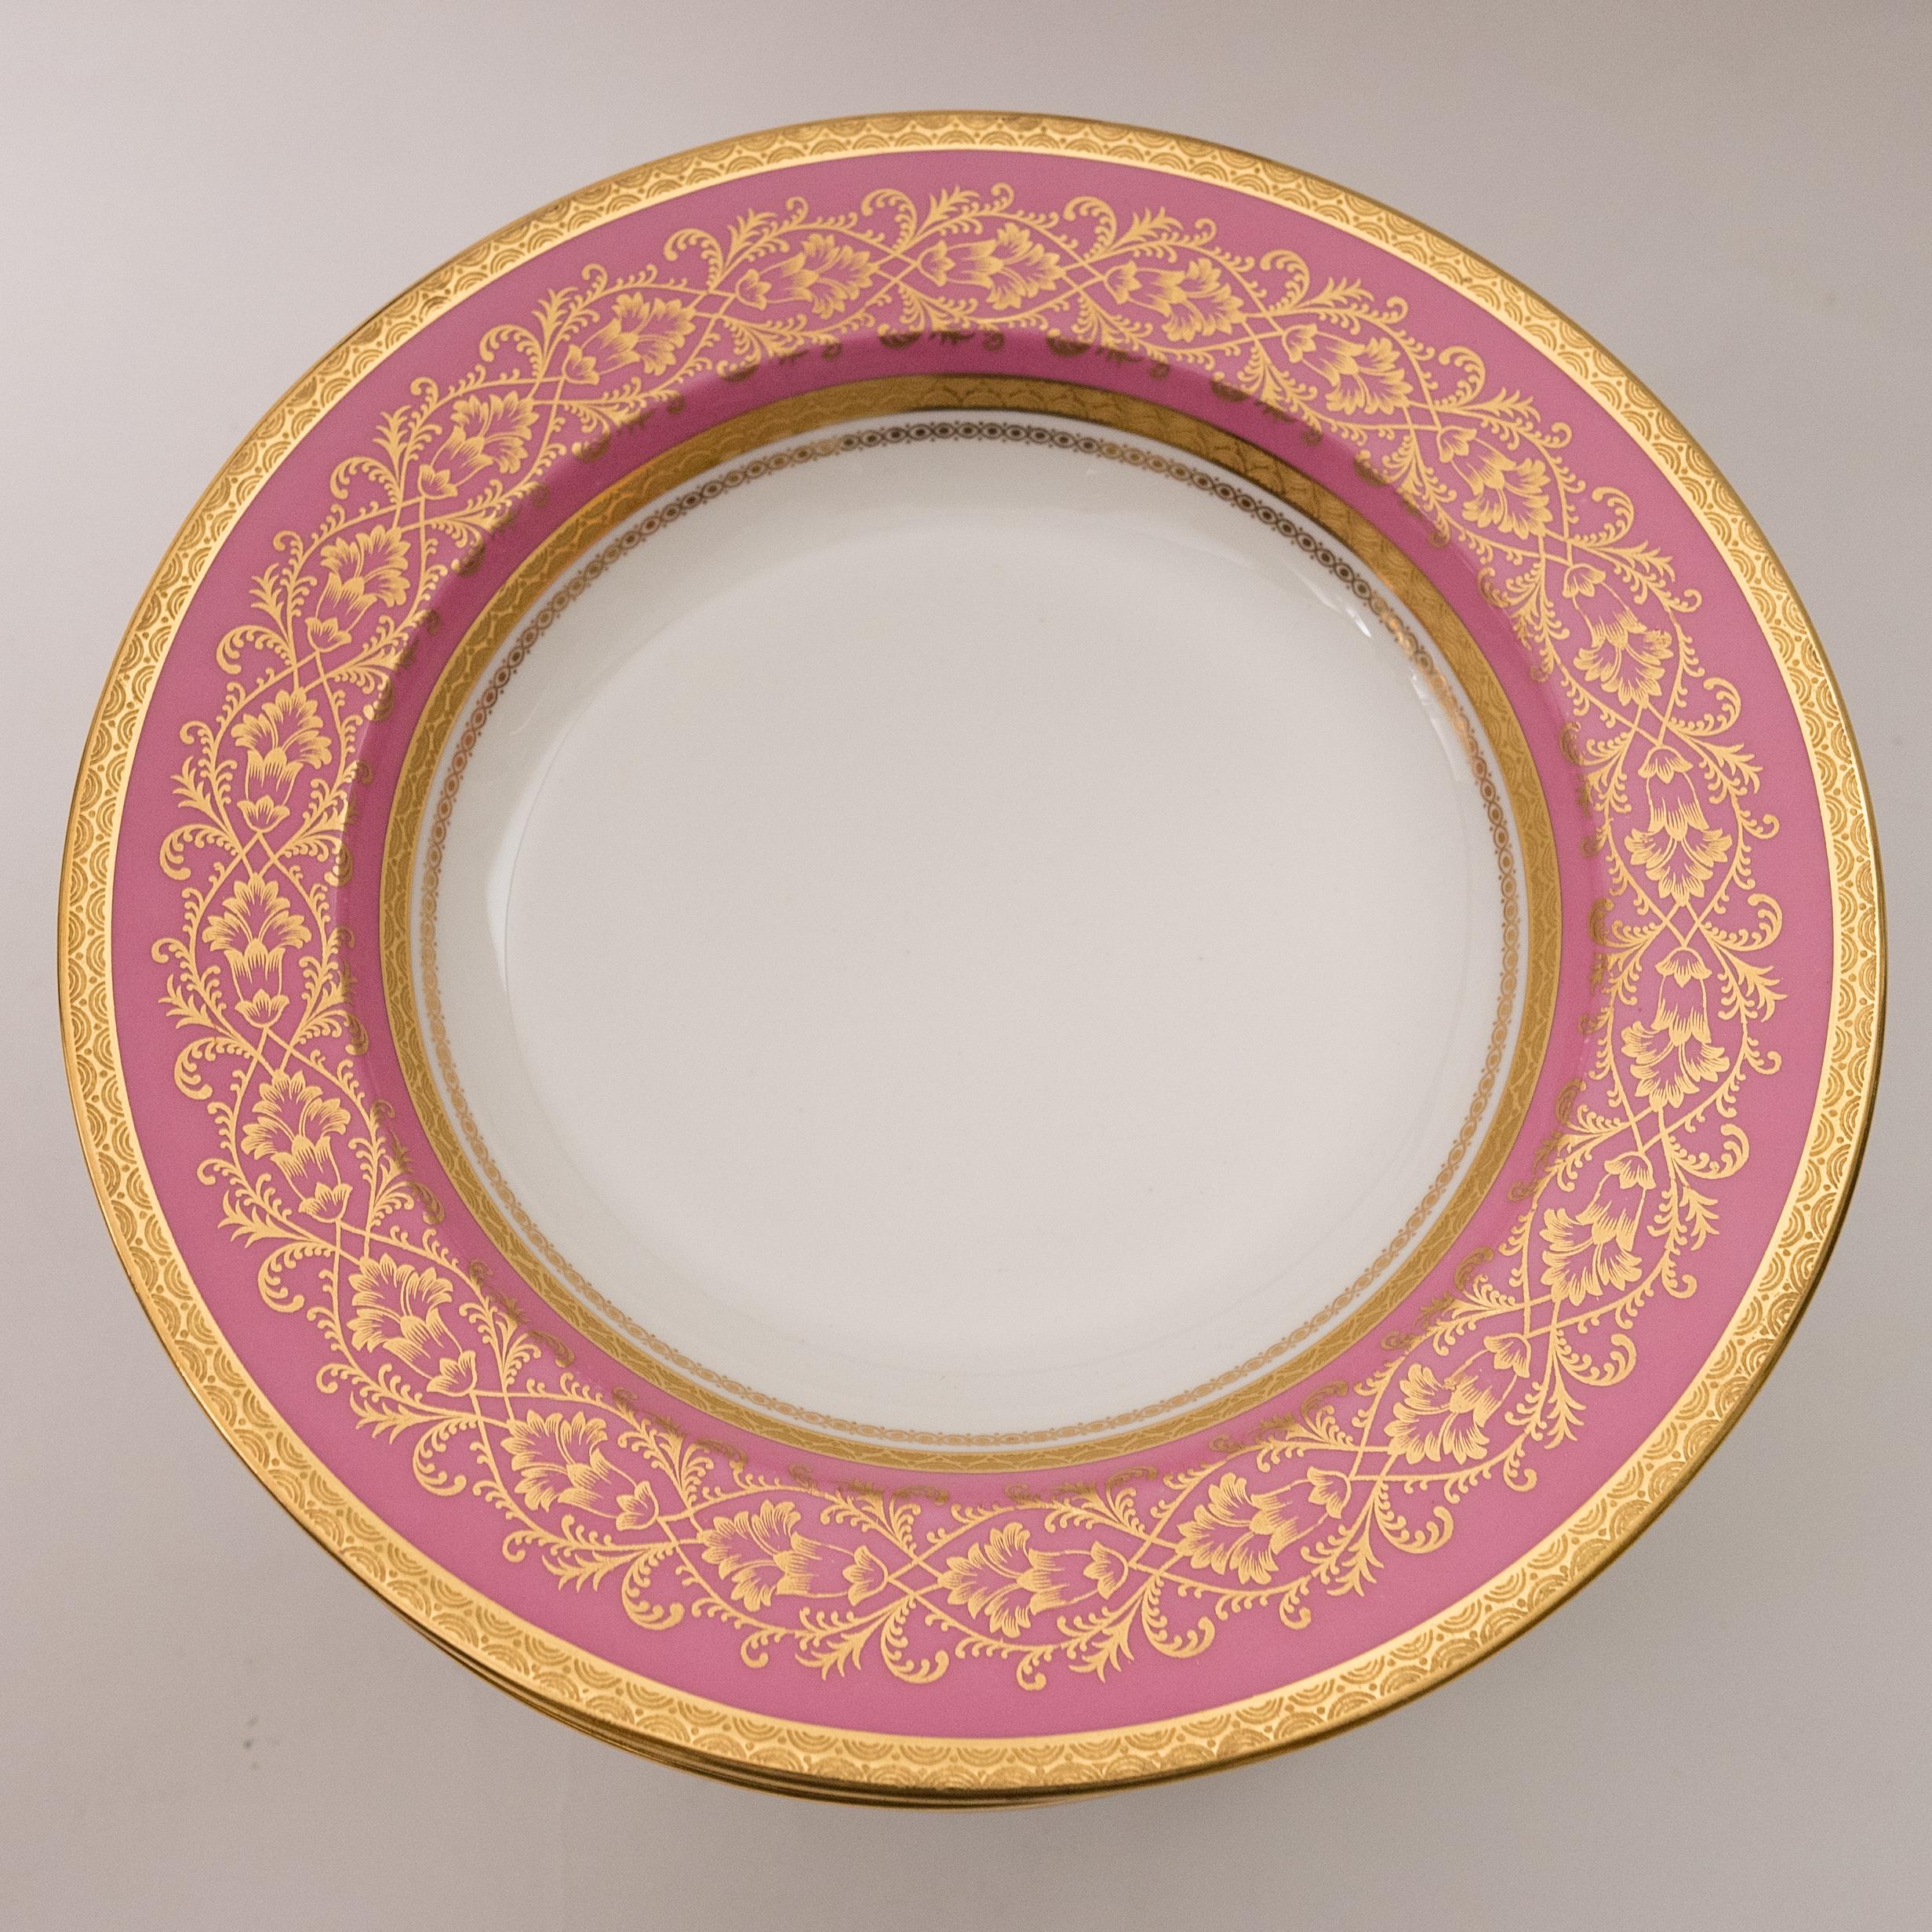 A hard to find set of pretty pink and nicely gilded rim soup bowls. Perfect to mix and match in with the other stacks we are listing this week or would go great with white and gold. Custom ordered through the fine Gilded Age retailer of William